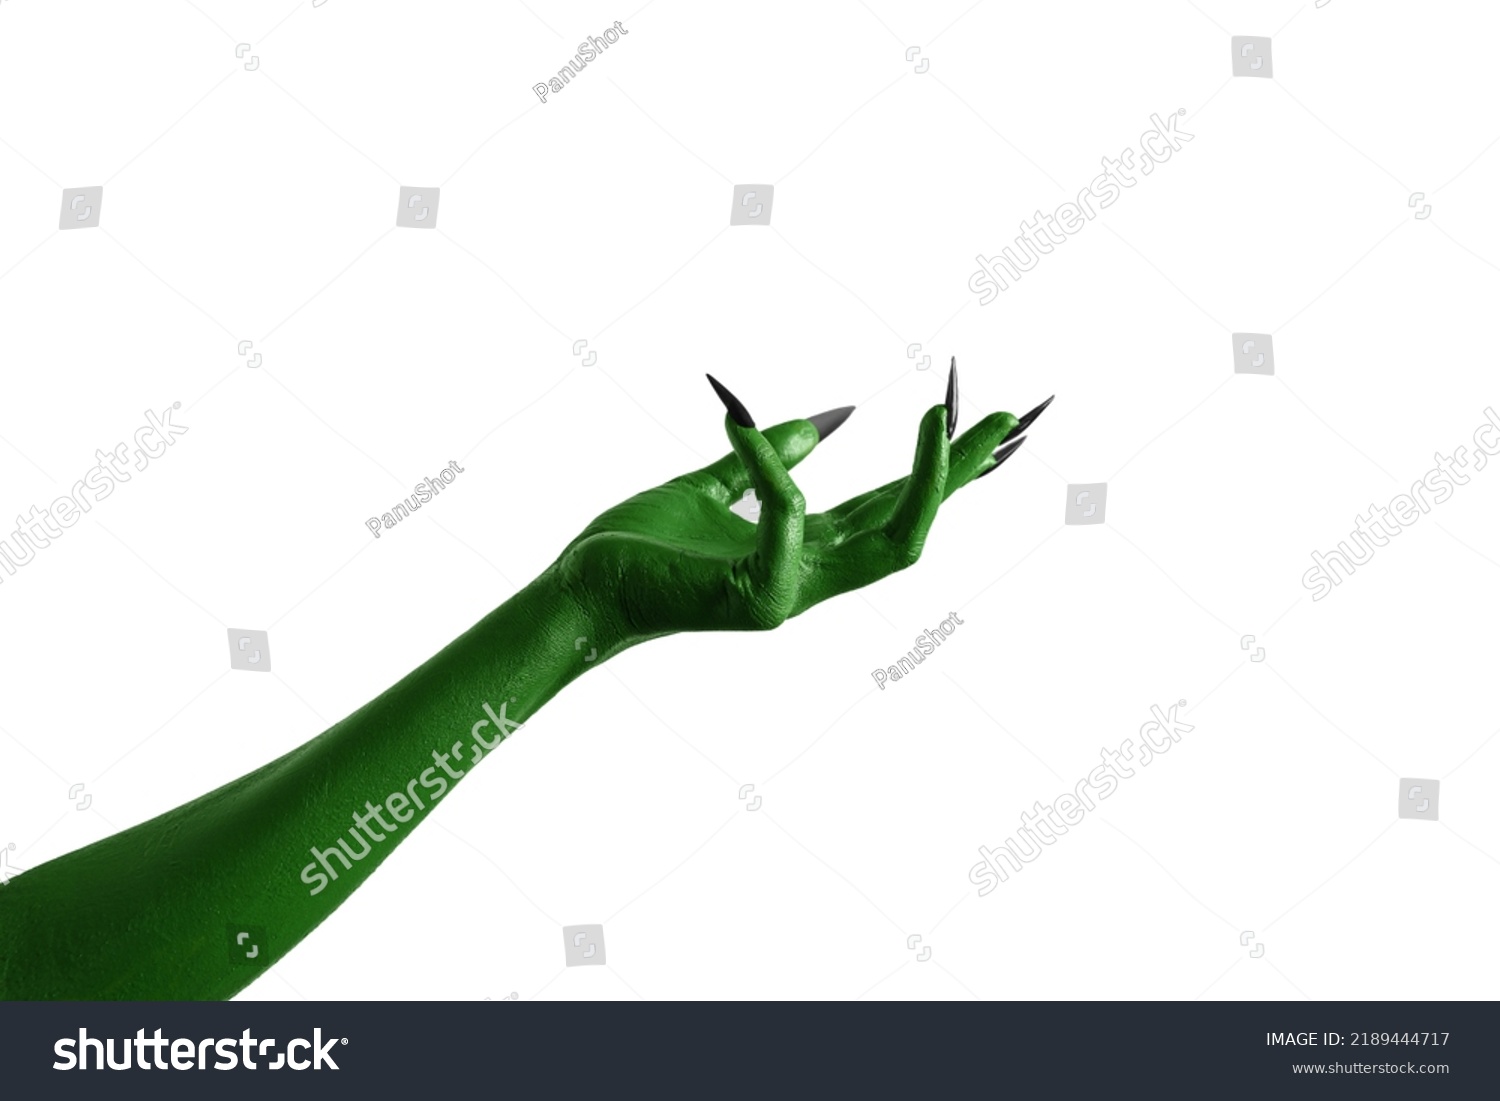 Halloween green color of witches, evil or zombie monster hand isolated on white background. #2189444717